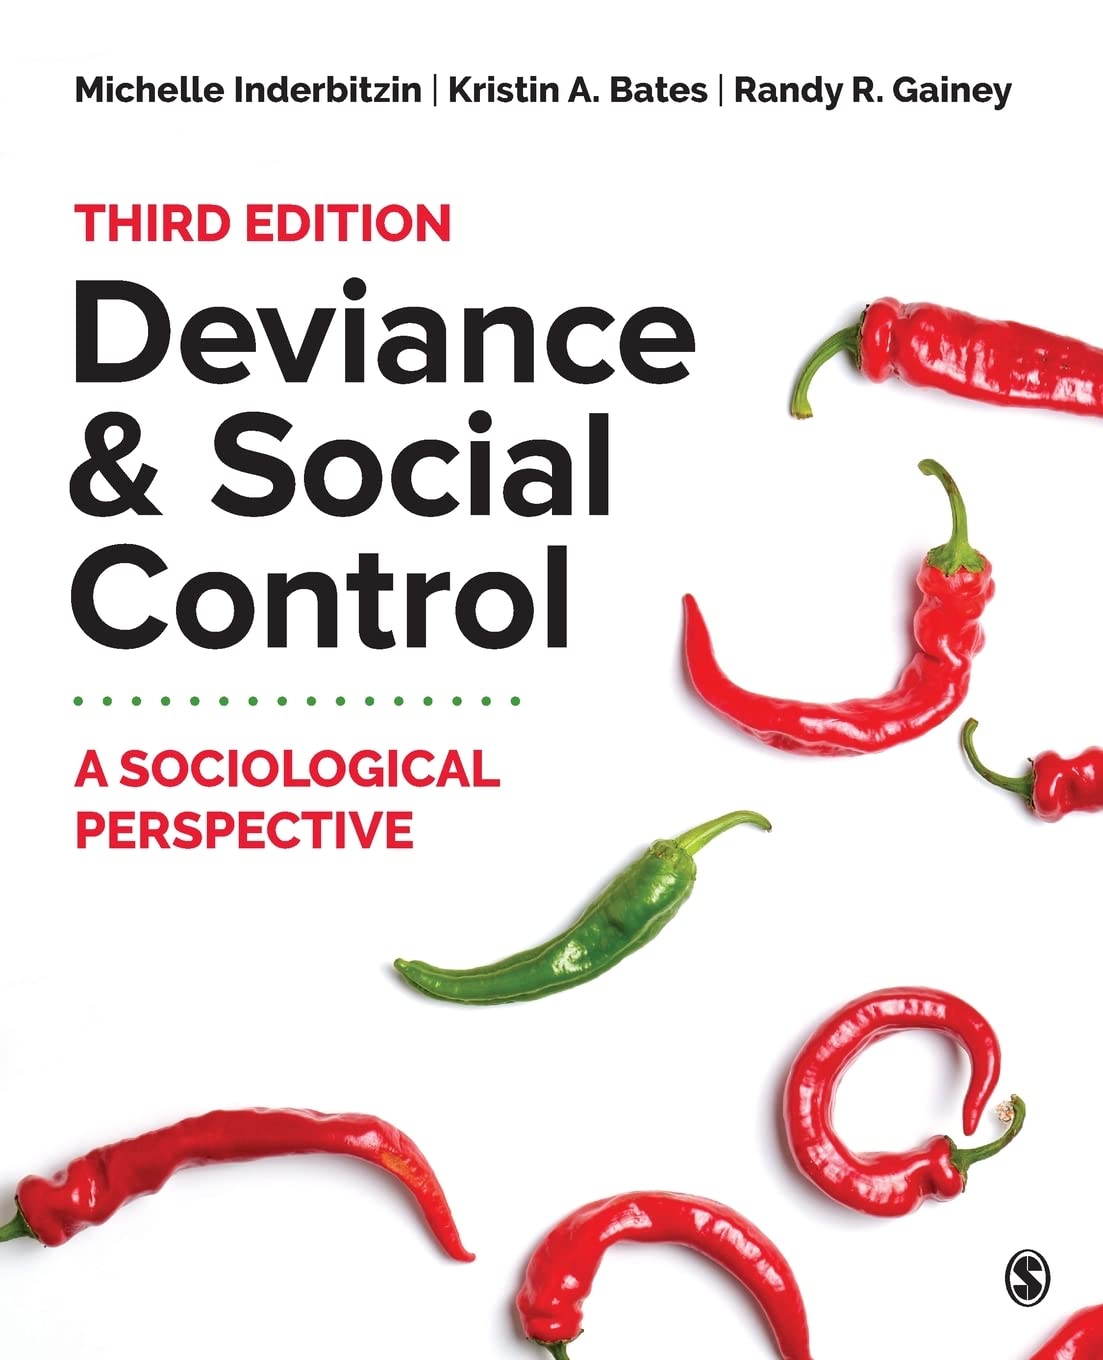 test bank for Deviance and Social Control, Inderbitzin,3e